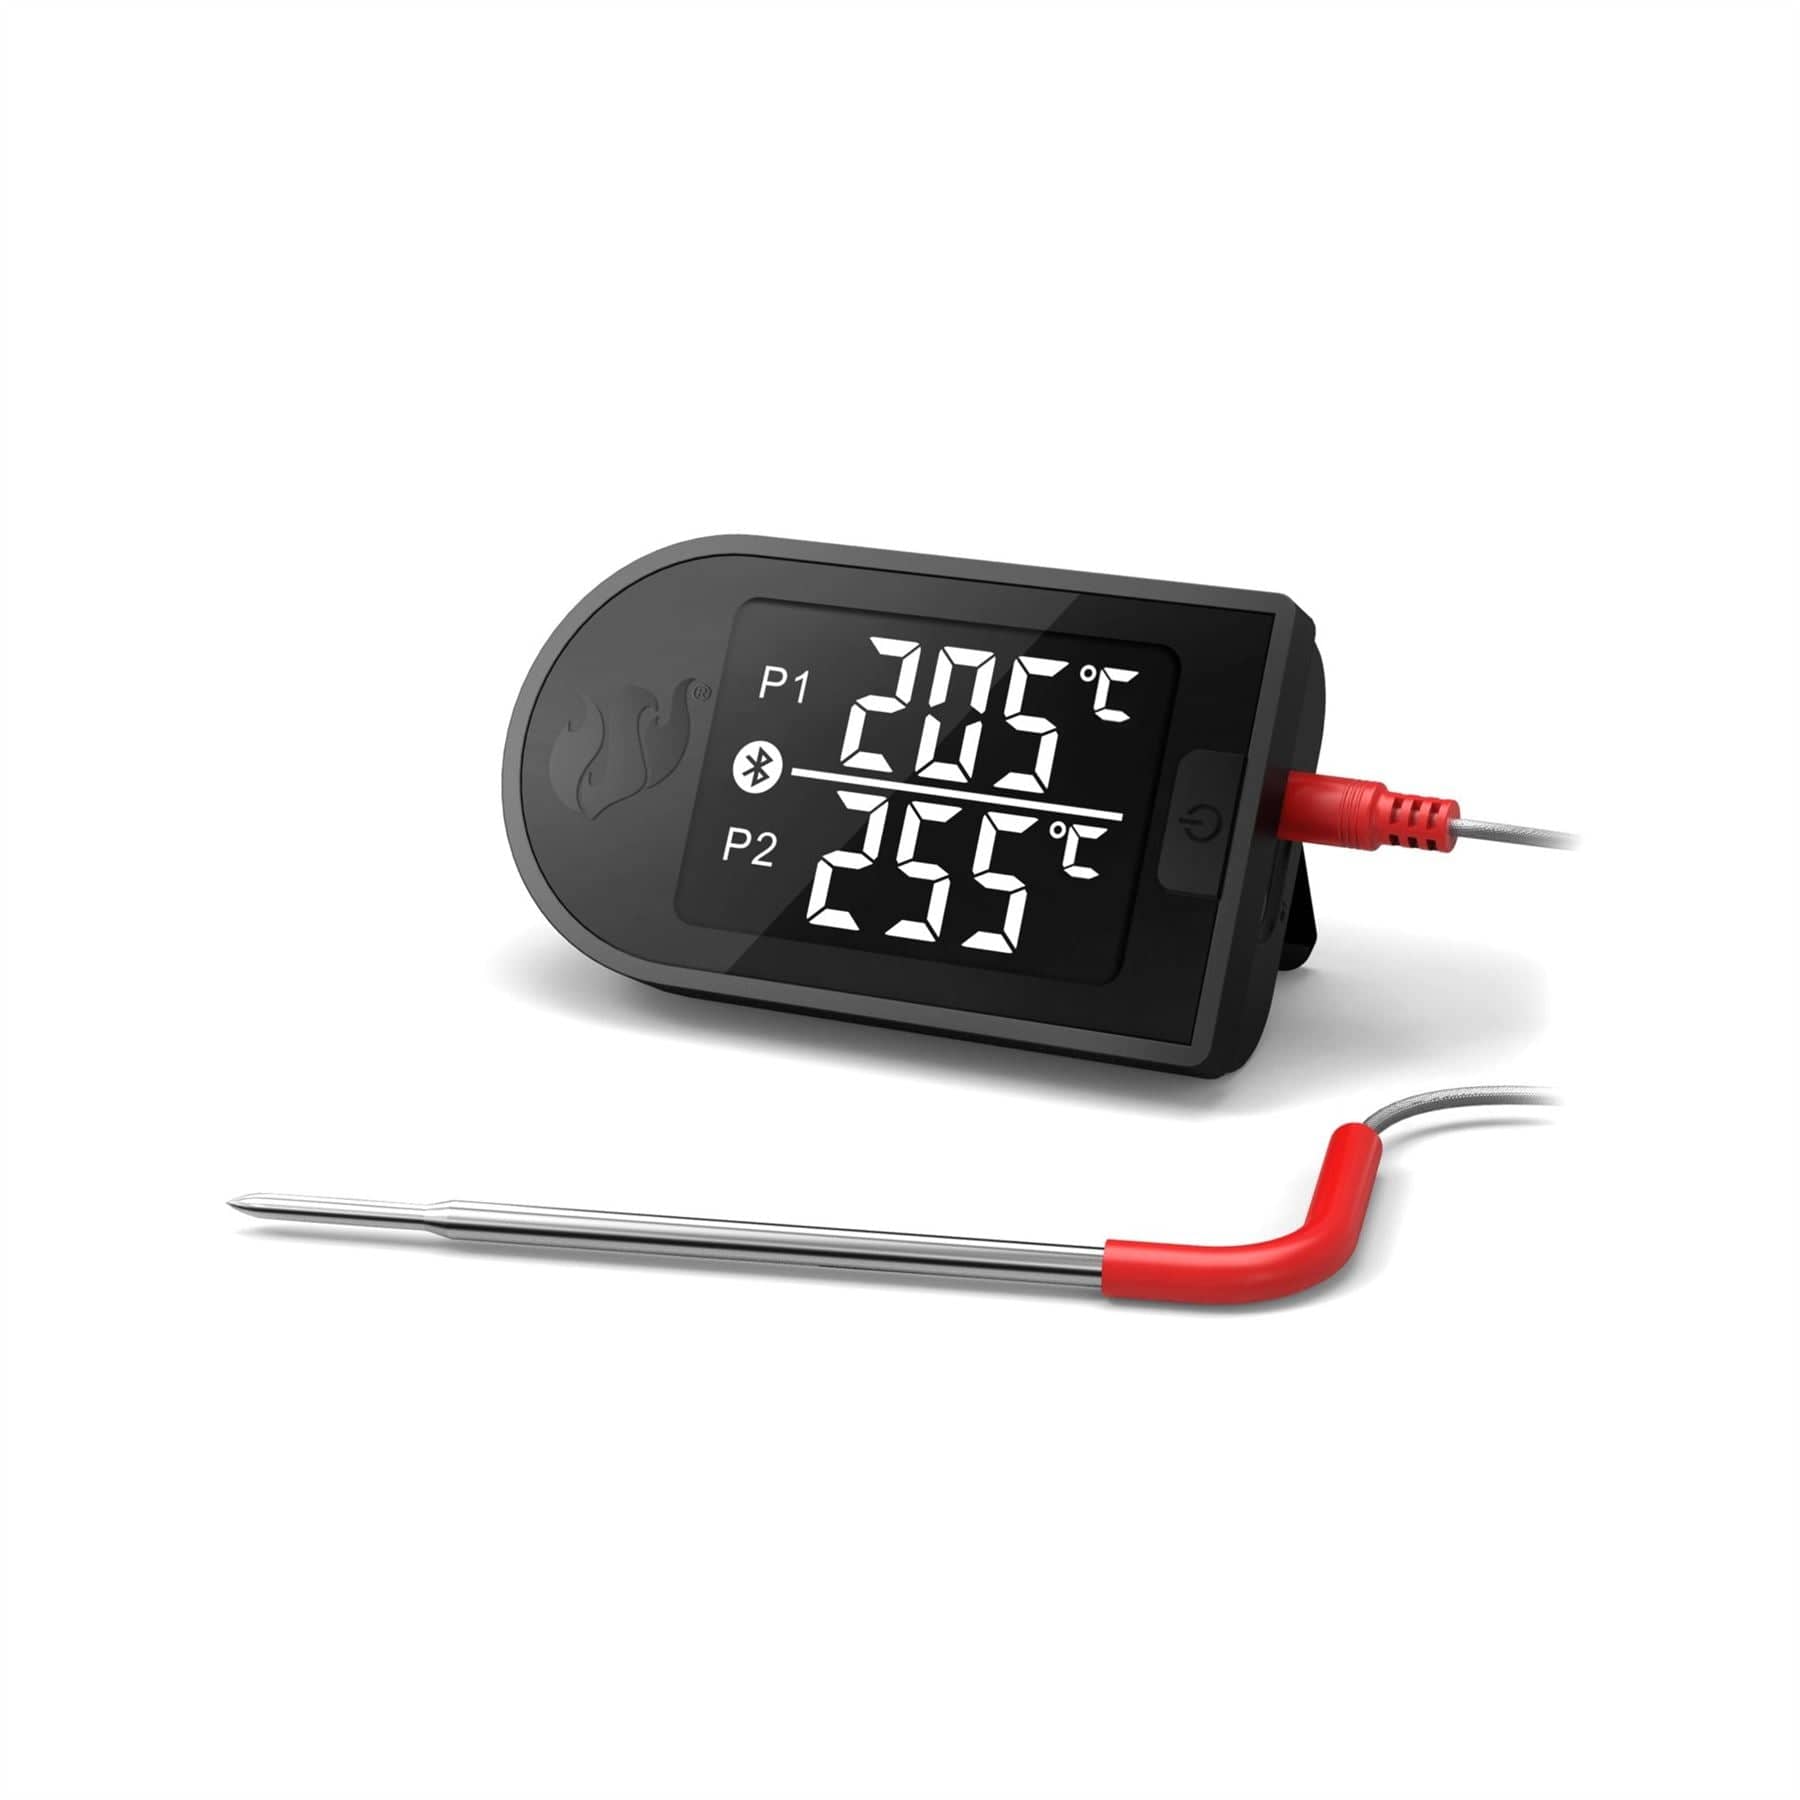 LED DIGITAL THERMOMETER